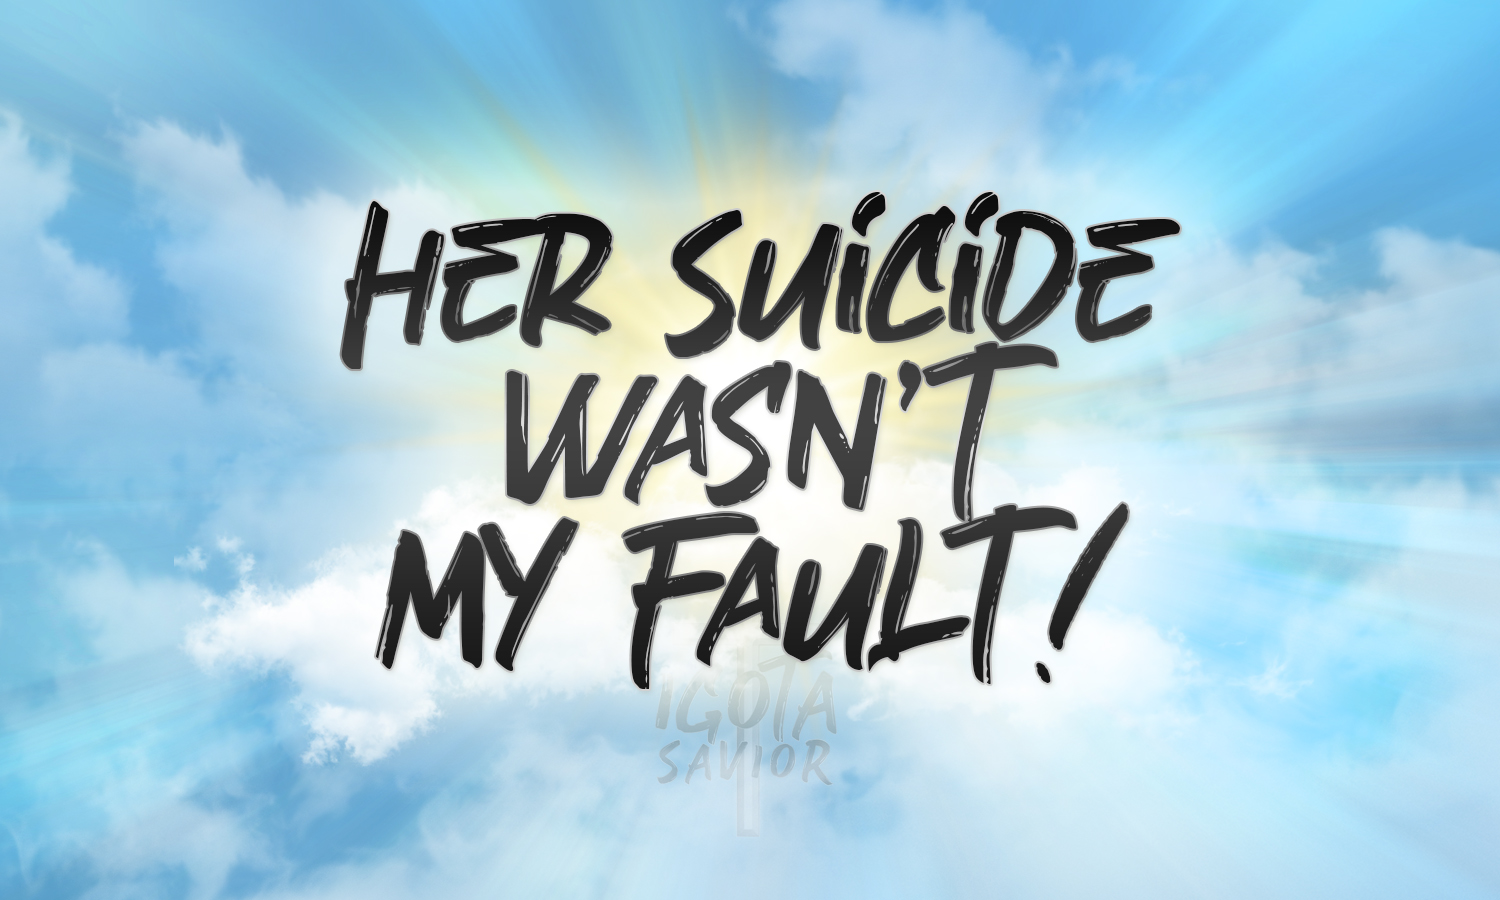 Her Suicide Wasn't My Fault!